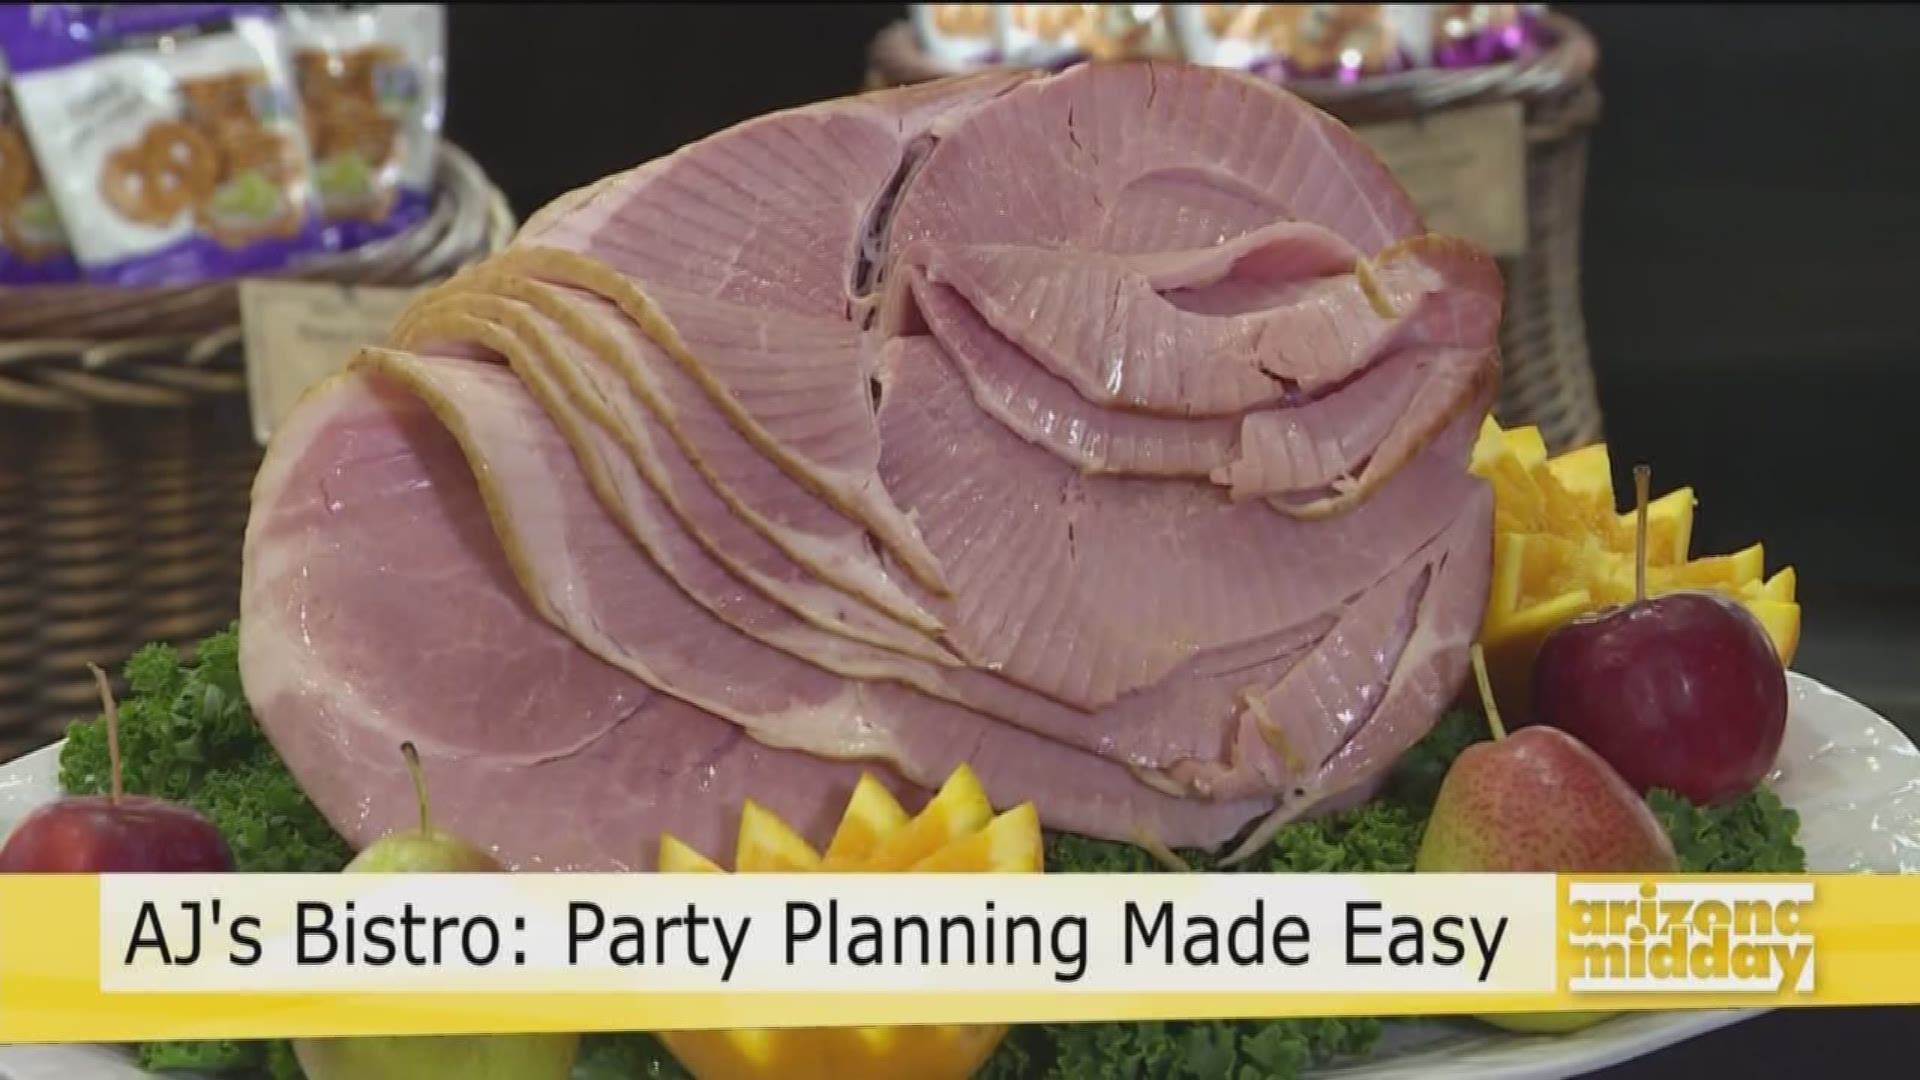 The Bistro at AJ's Fine Foods has everything you need to make your holiday meal stress free.